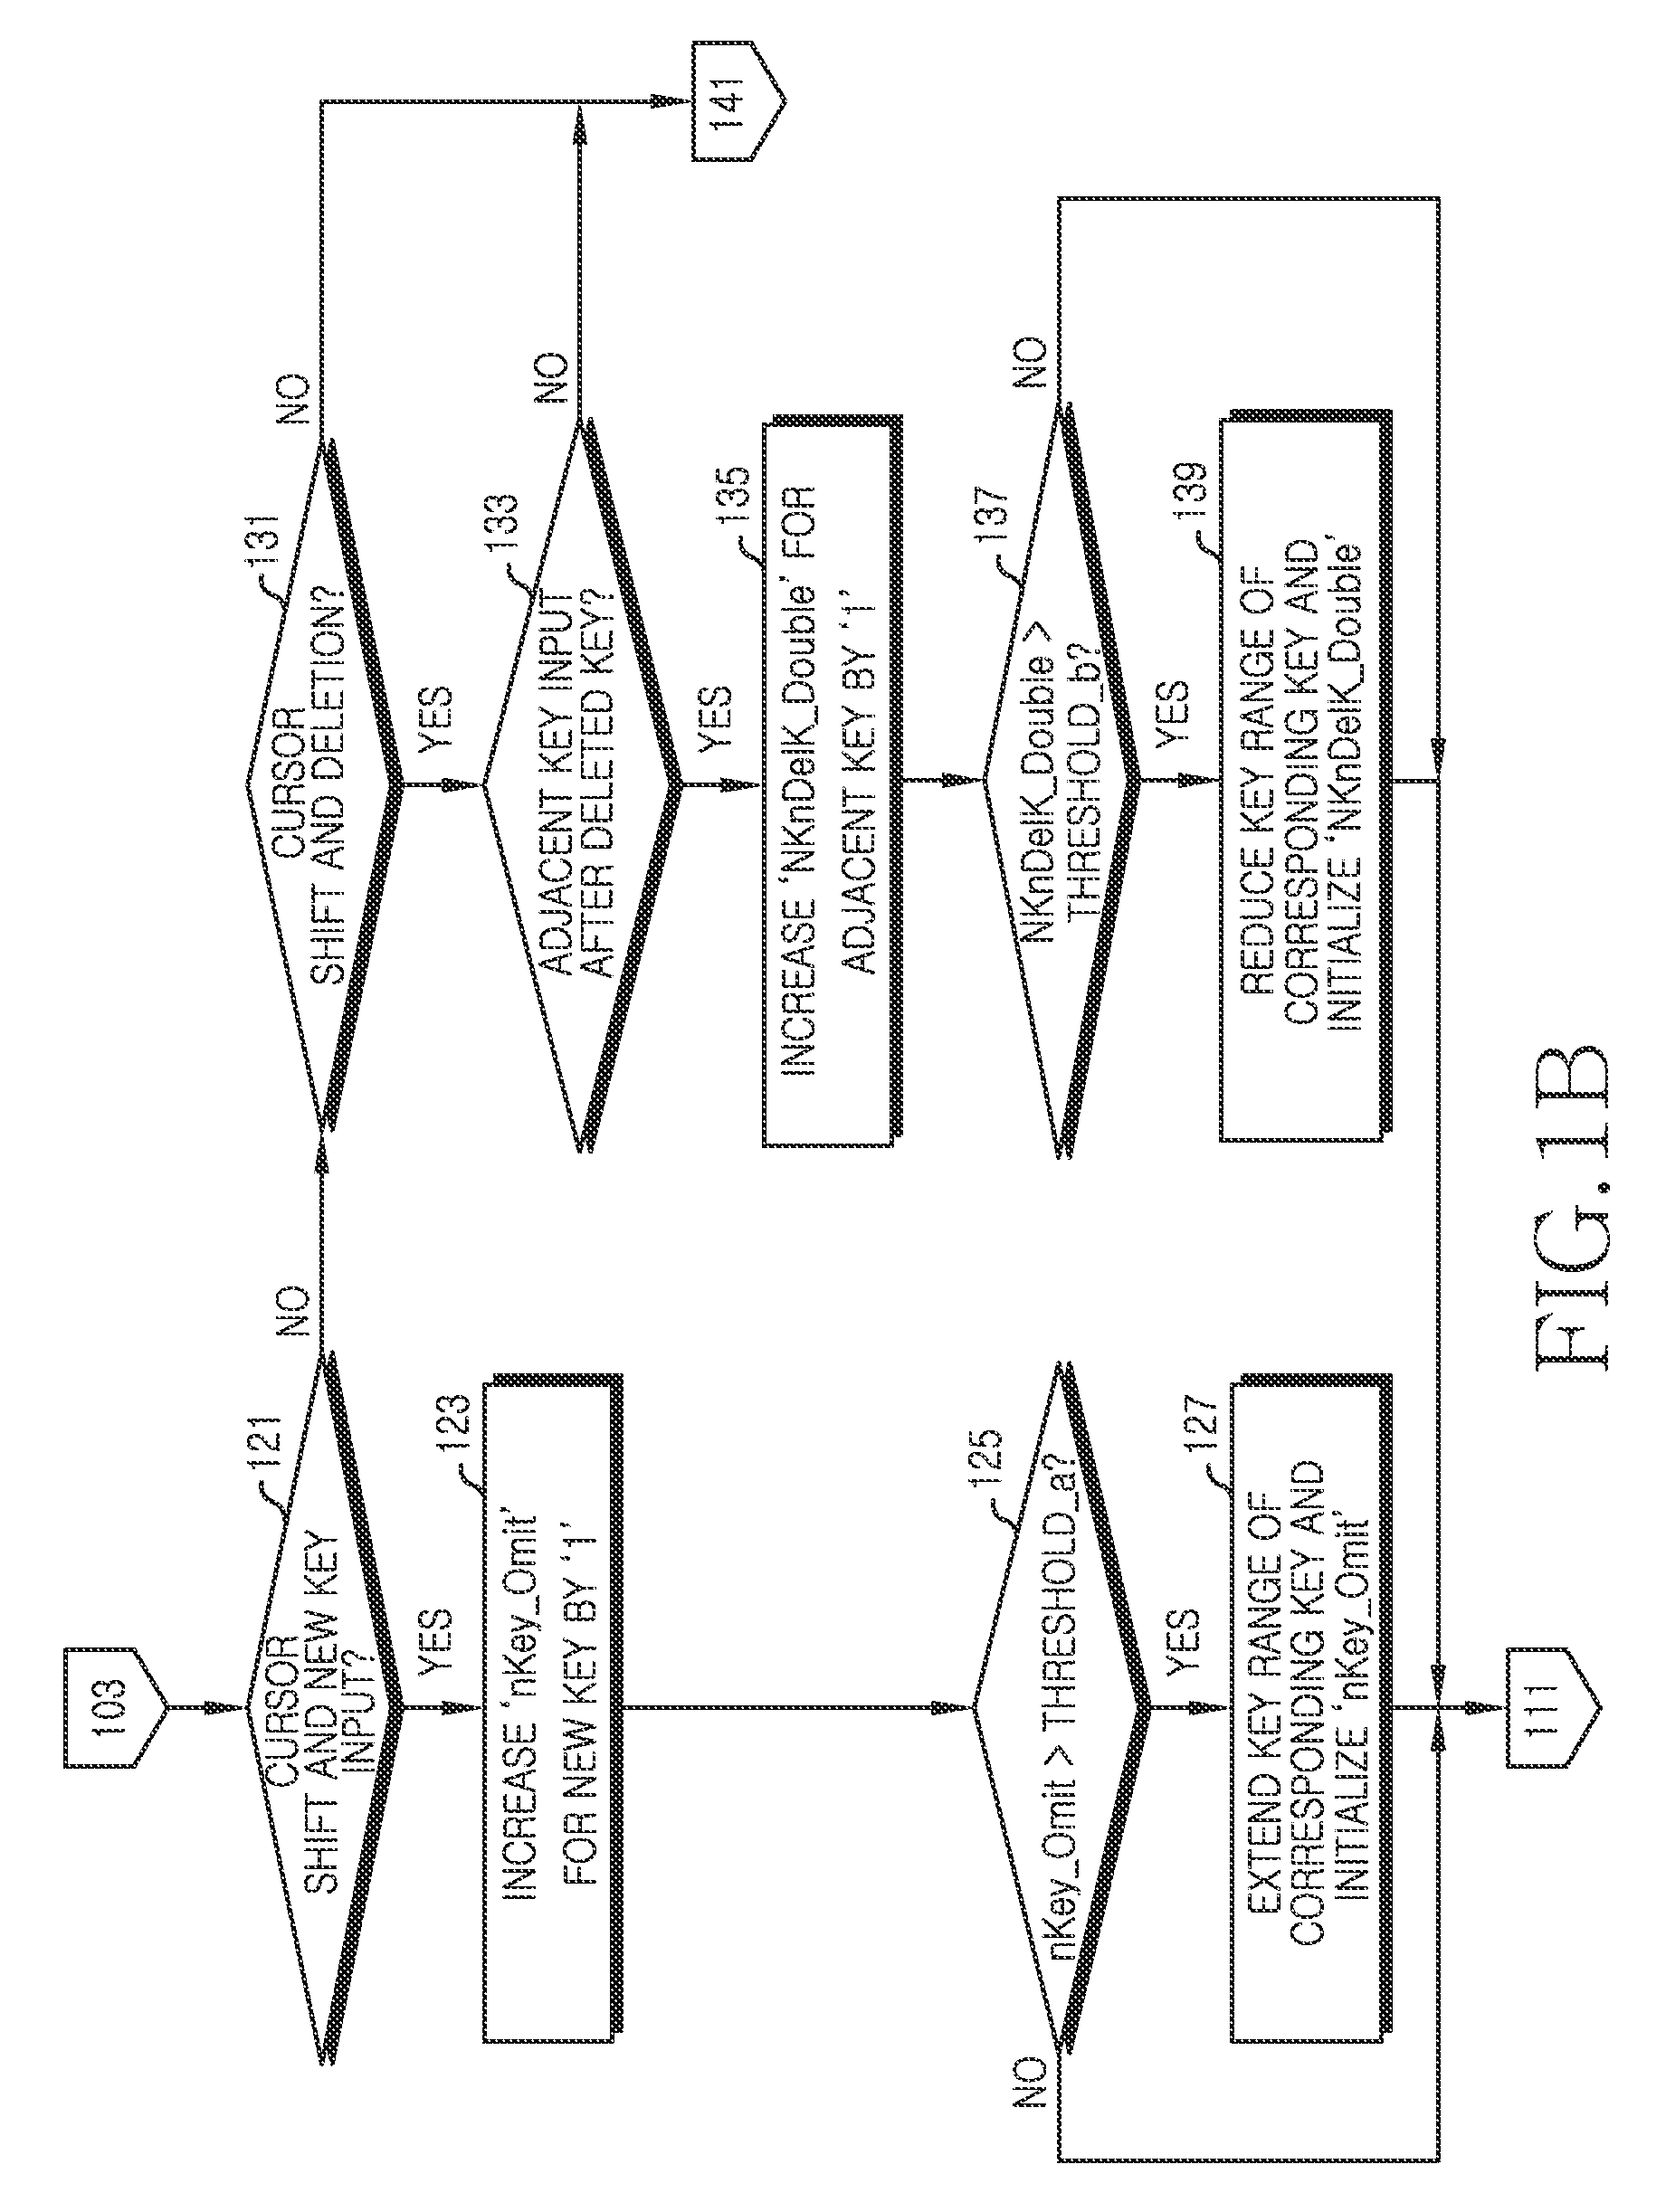 Apparatus and method for adjusting a key range of a keycapless keyboard